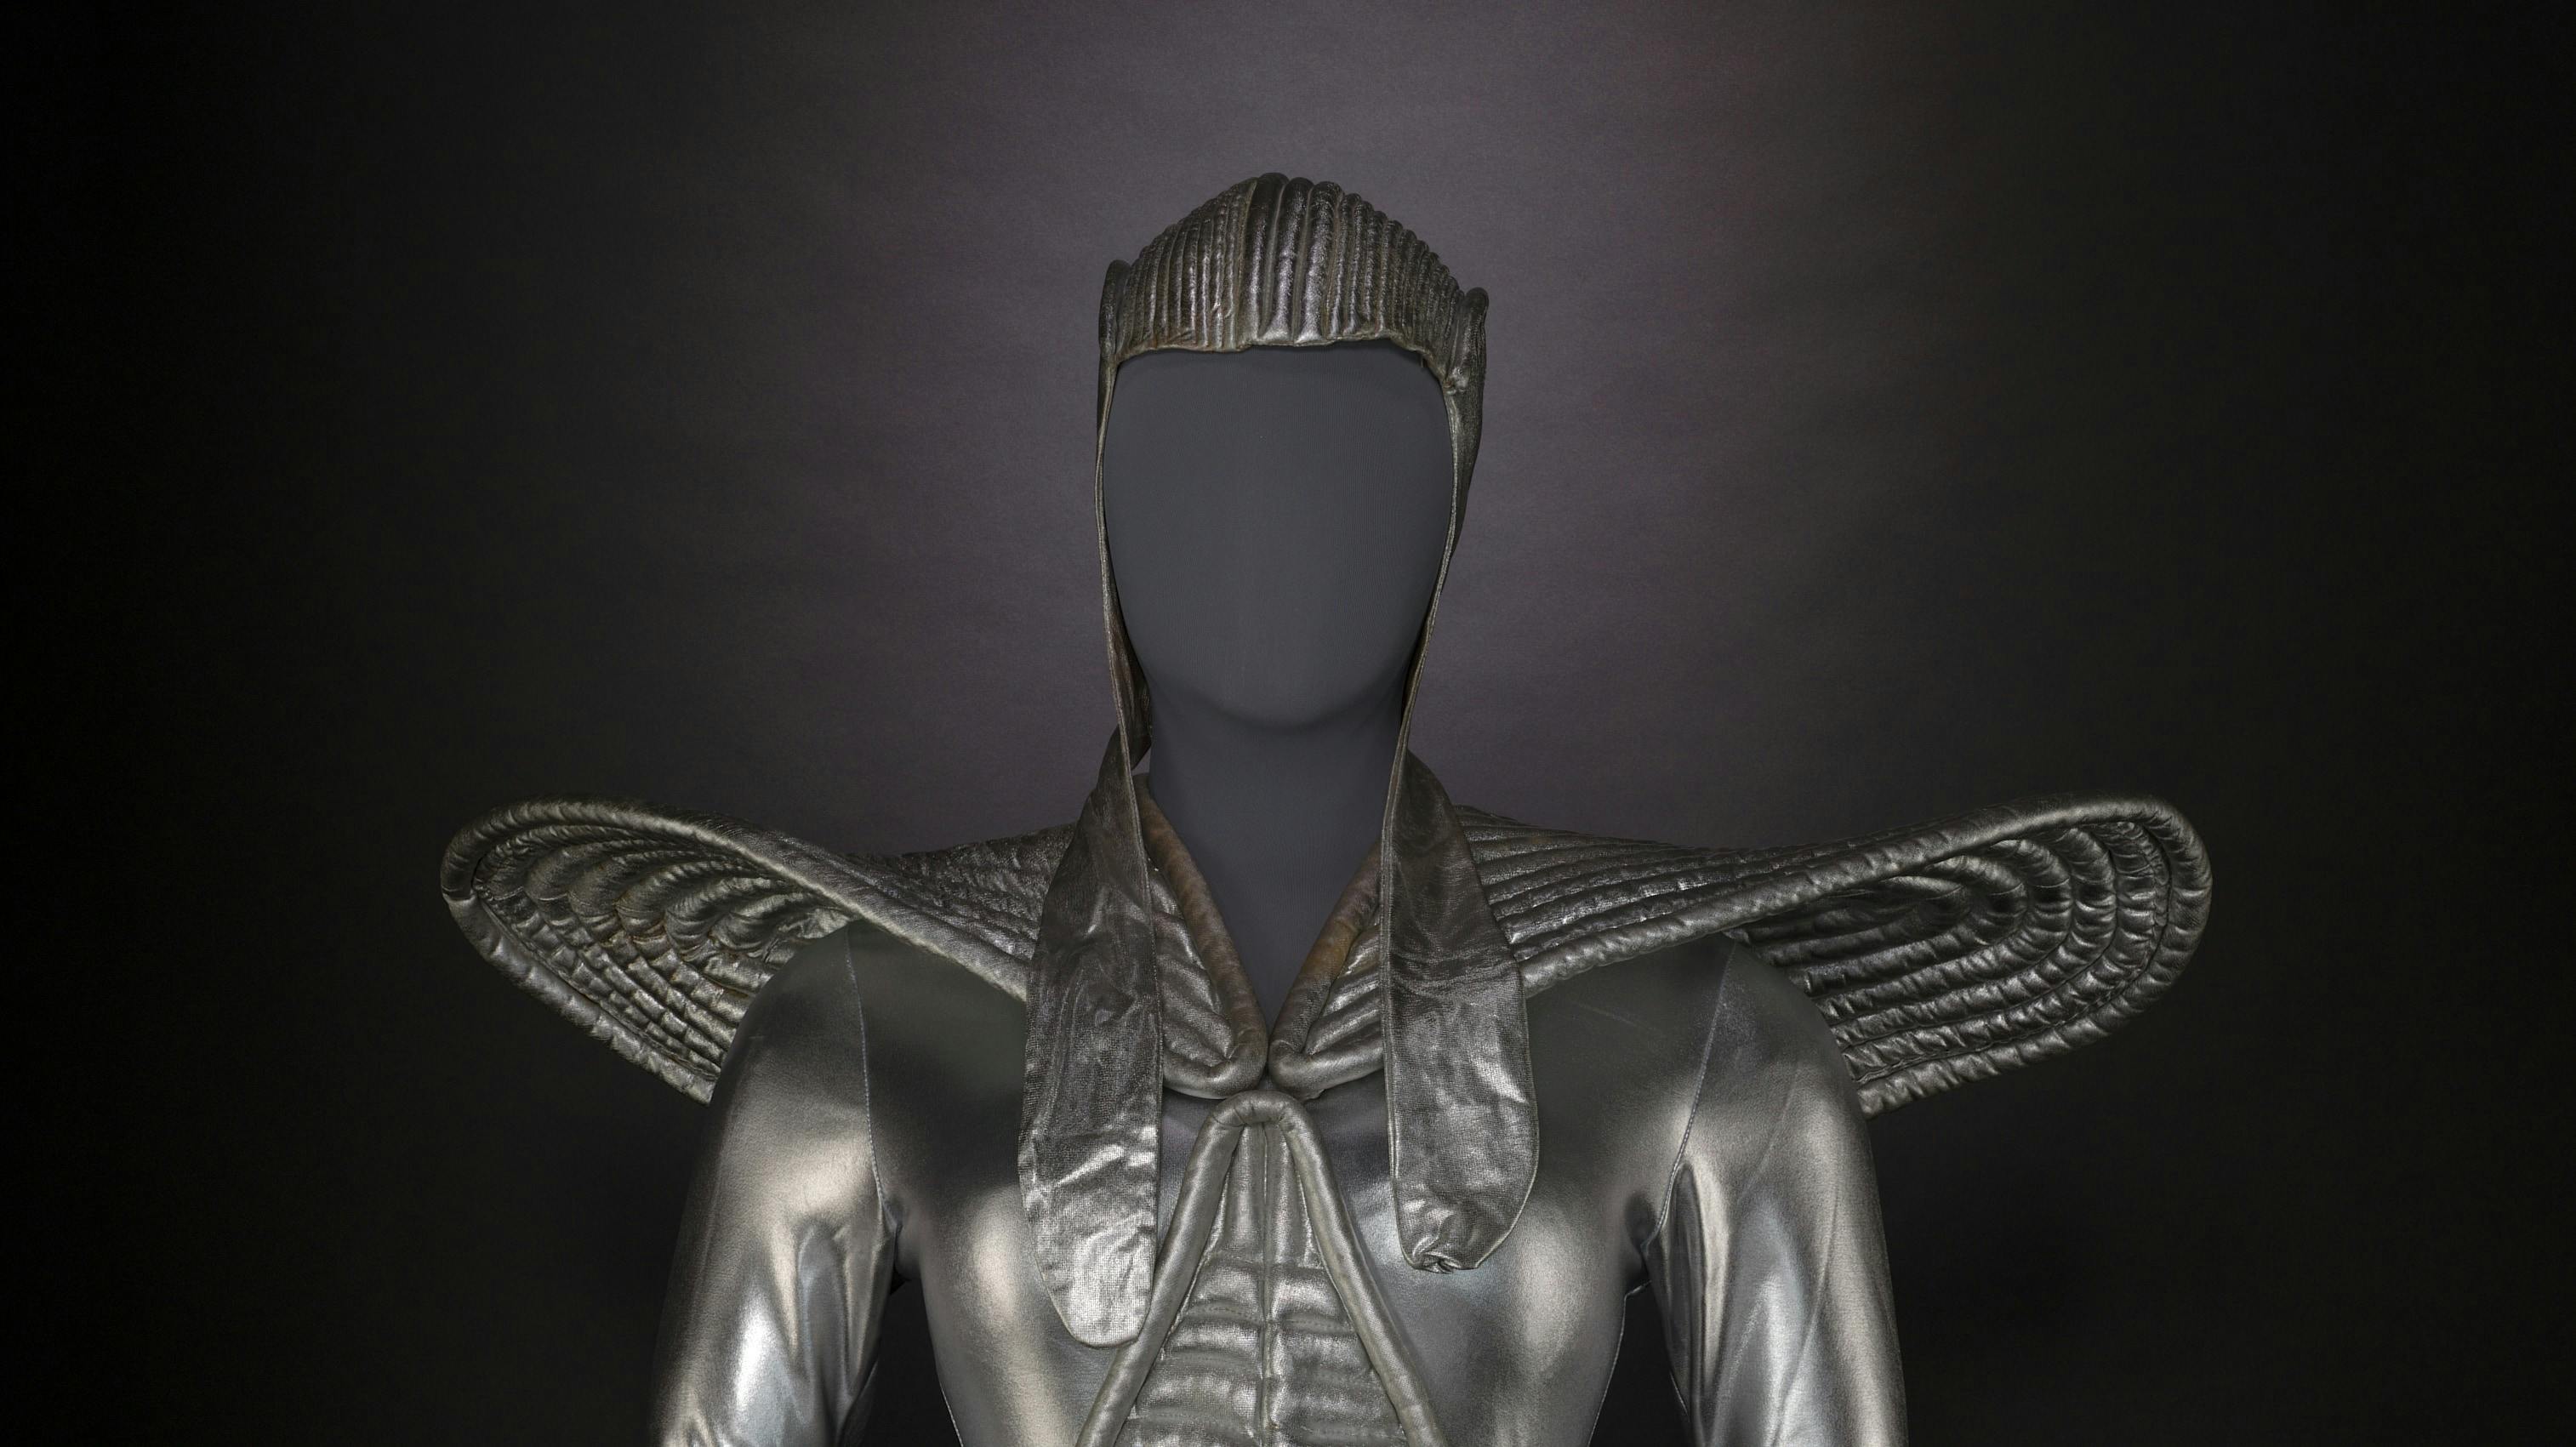 metallic silver costume with large shoulder protrusions